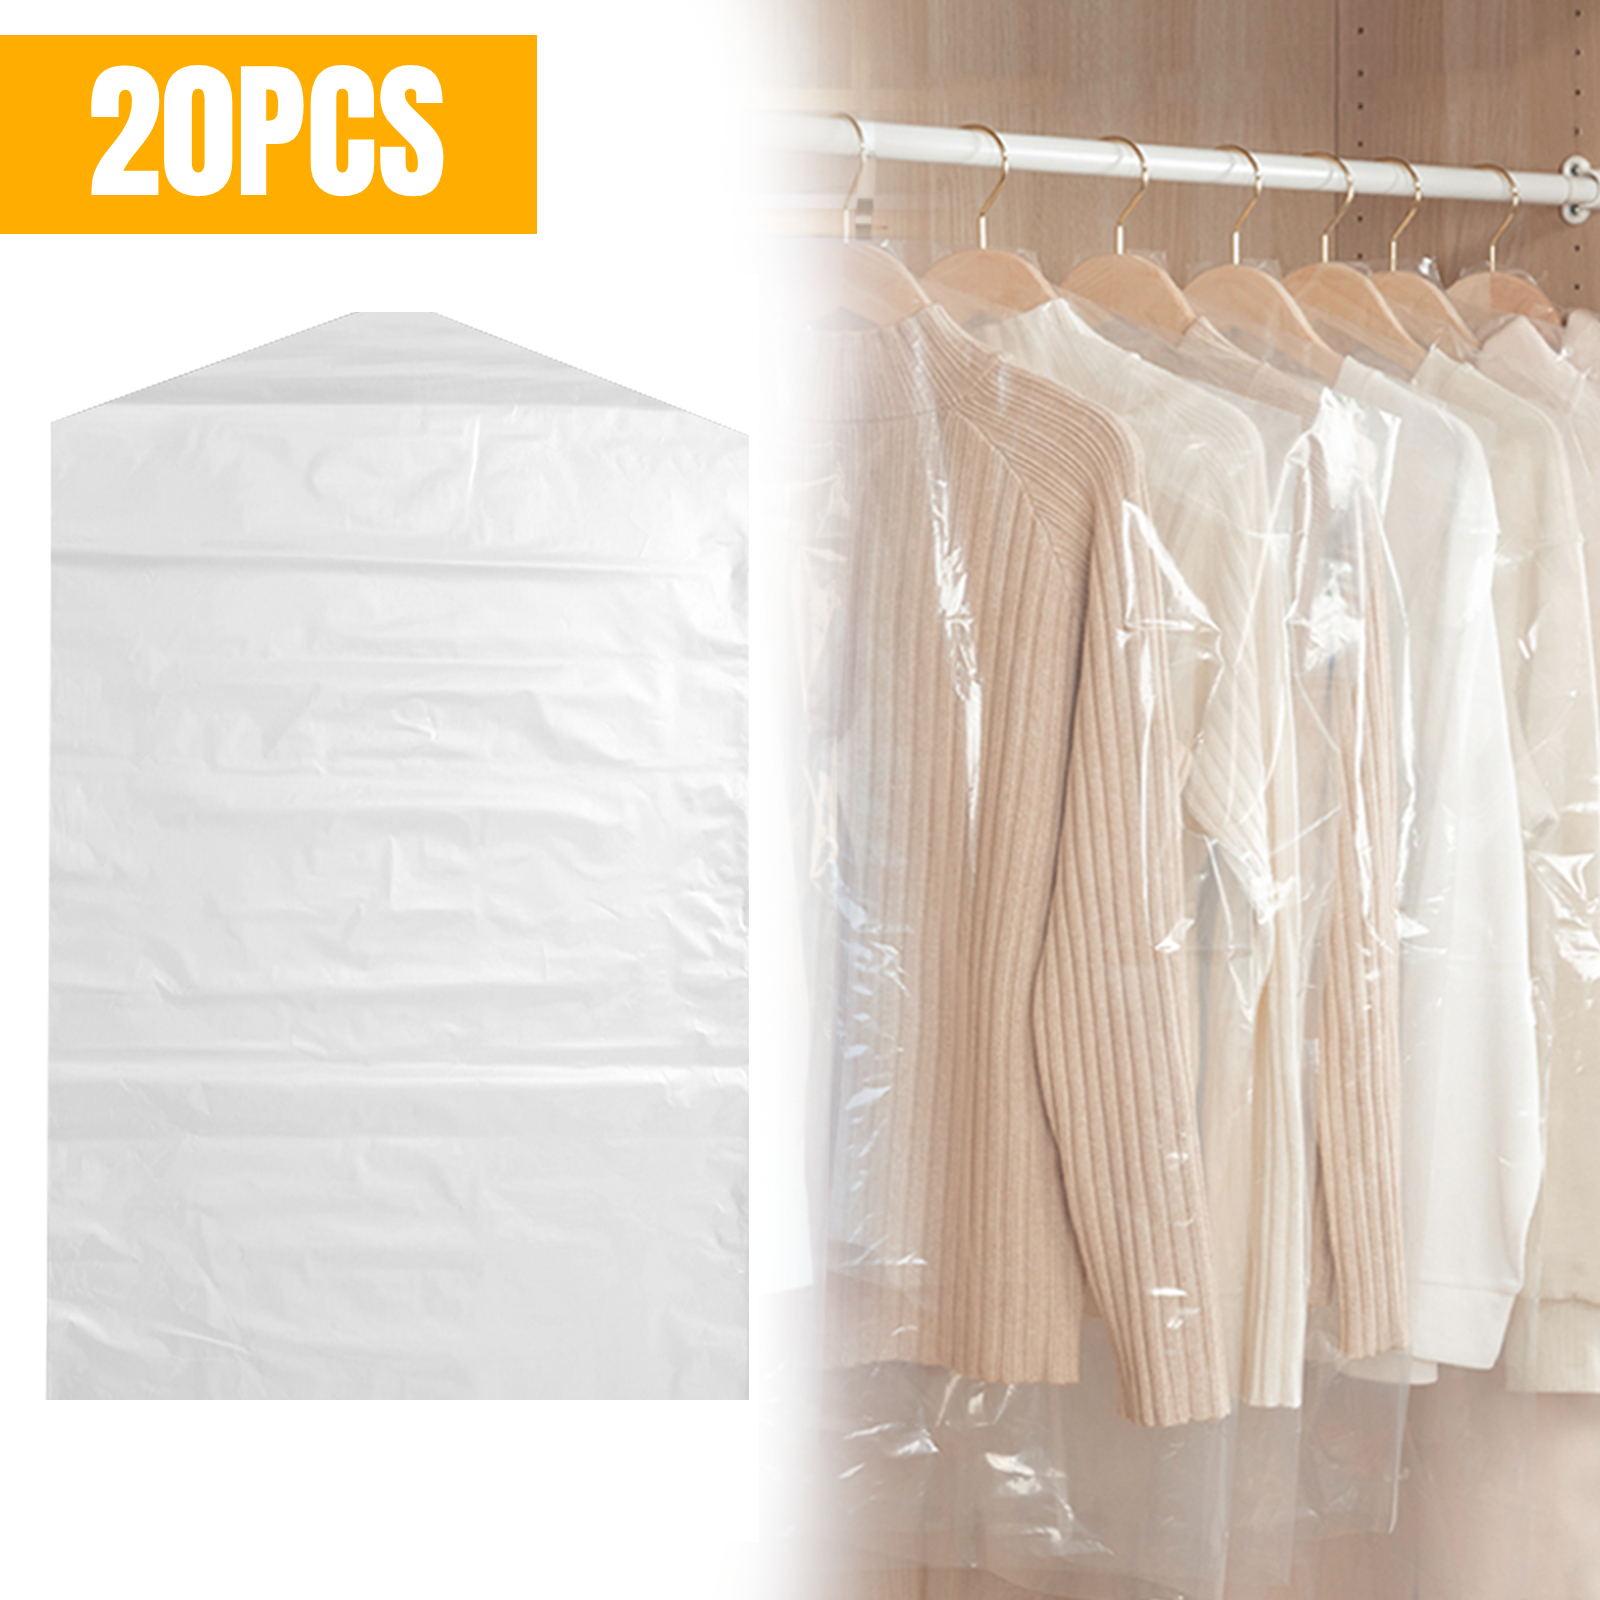 TSV Transparent Garment Covers, 20 PCS Plastic Clothing Dust Covers for Dry  Cleaner, Home Closet Storage Hanging Garment Bags for Suits, Closet